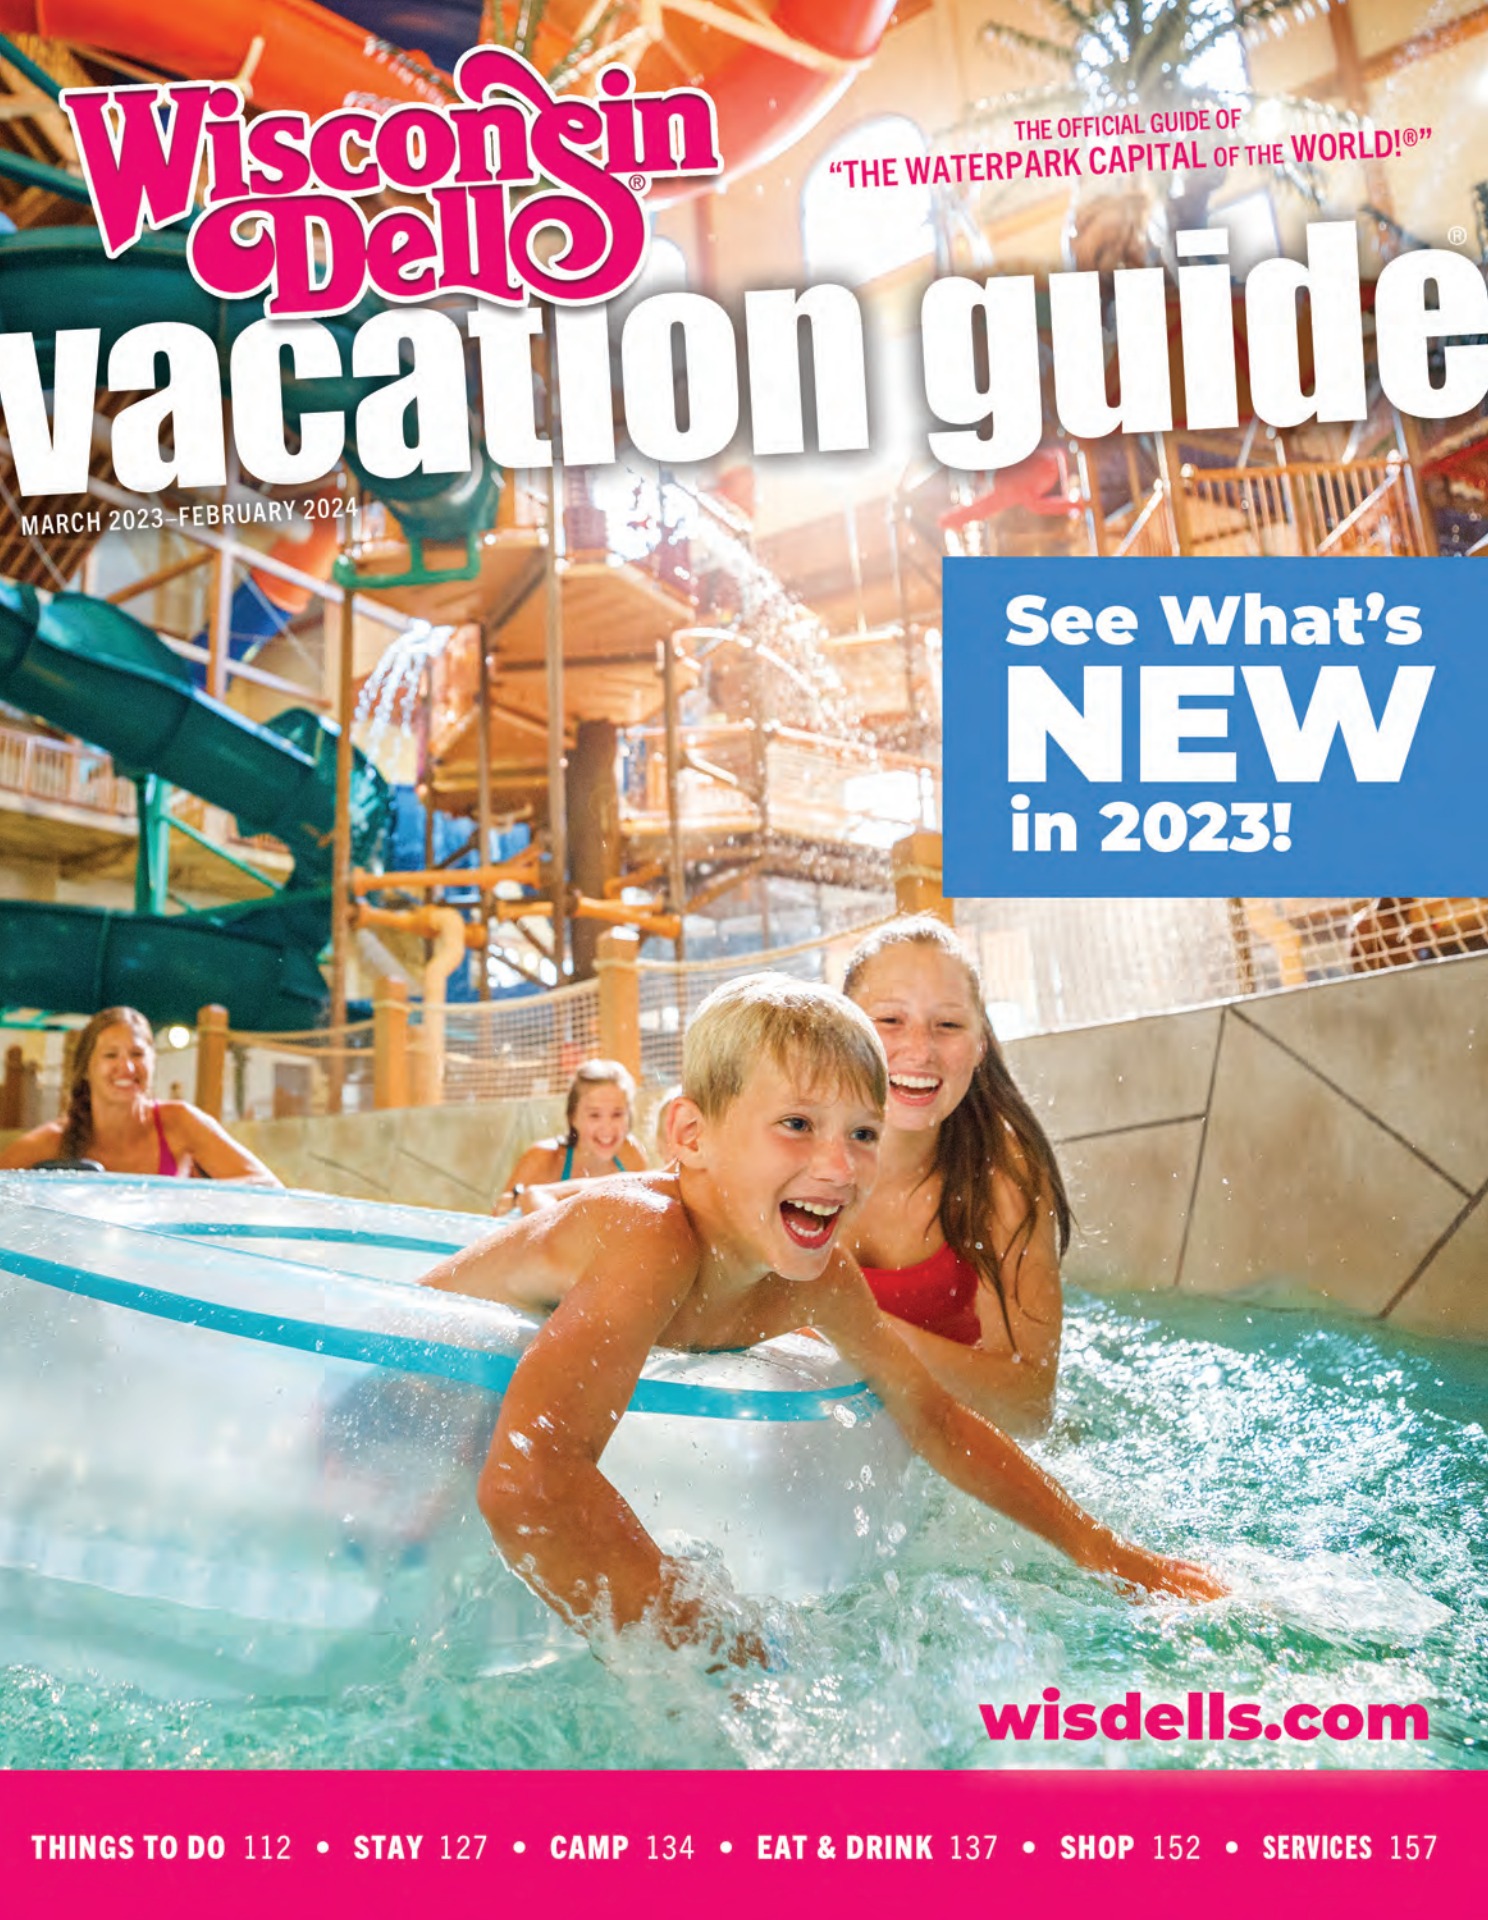 Wisconsin Dells Travel and Attraction Guide